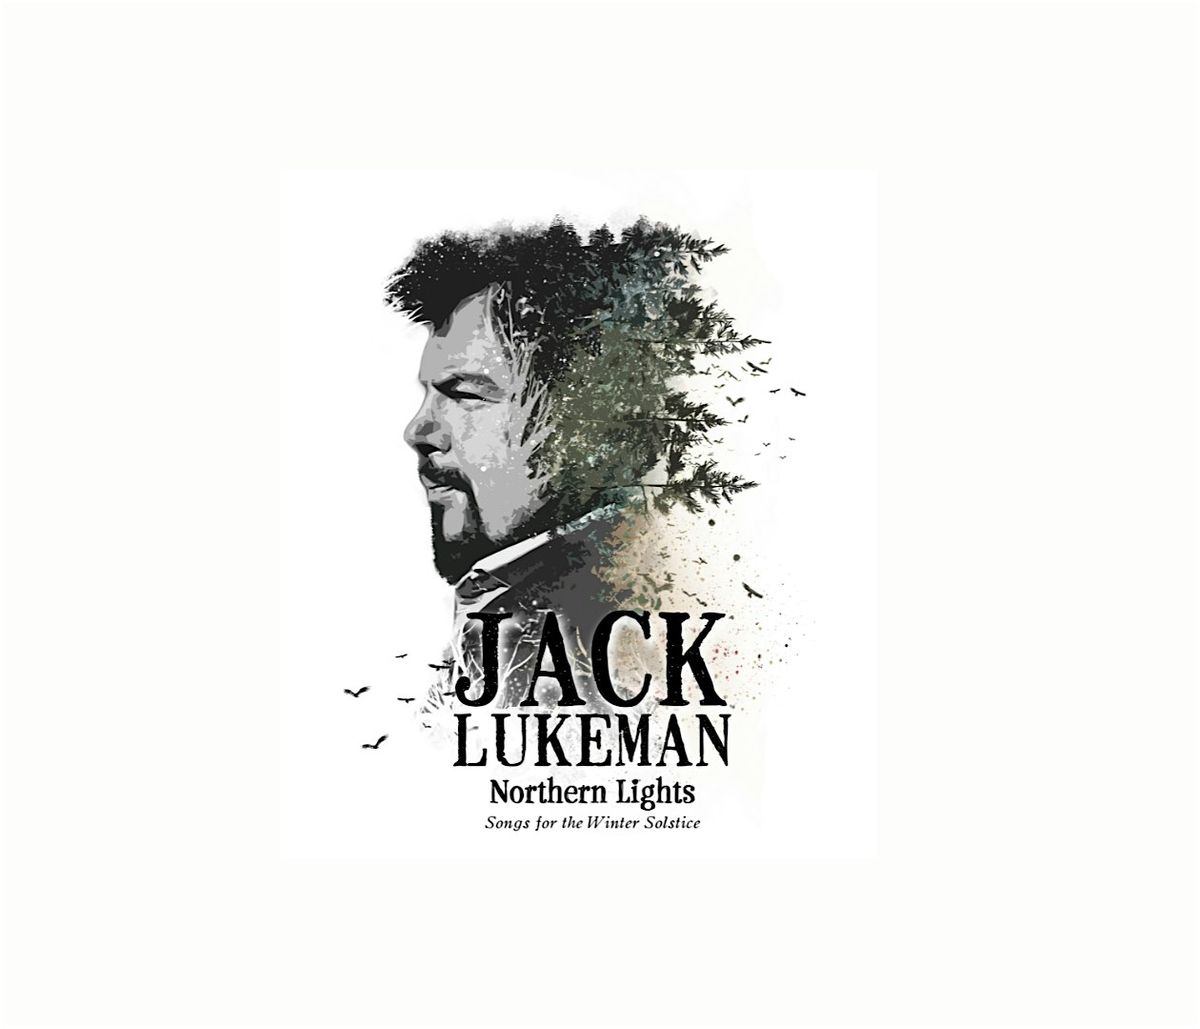 Jack Lukeman; Northern Lights, Songs for the Winter Solstice